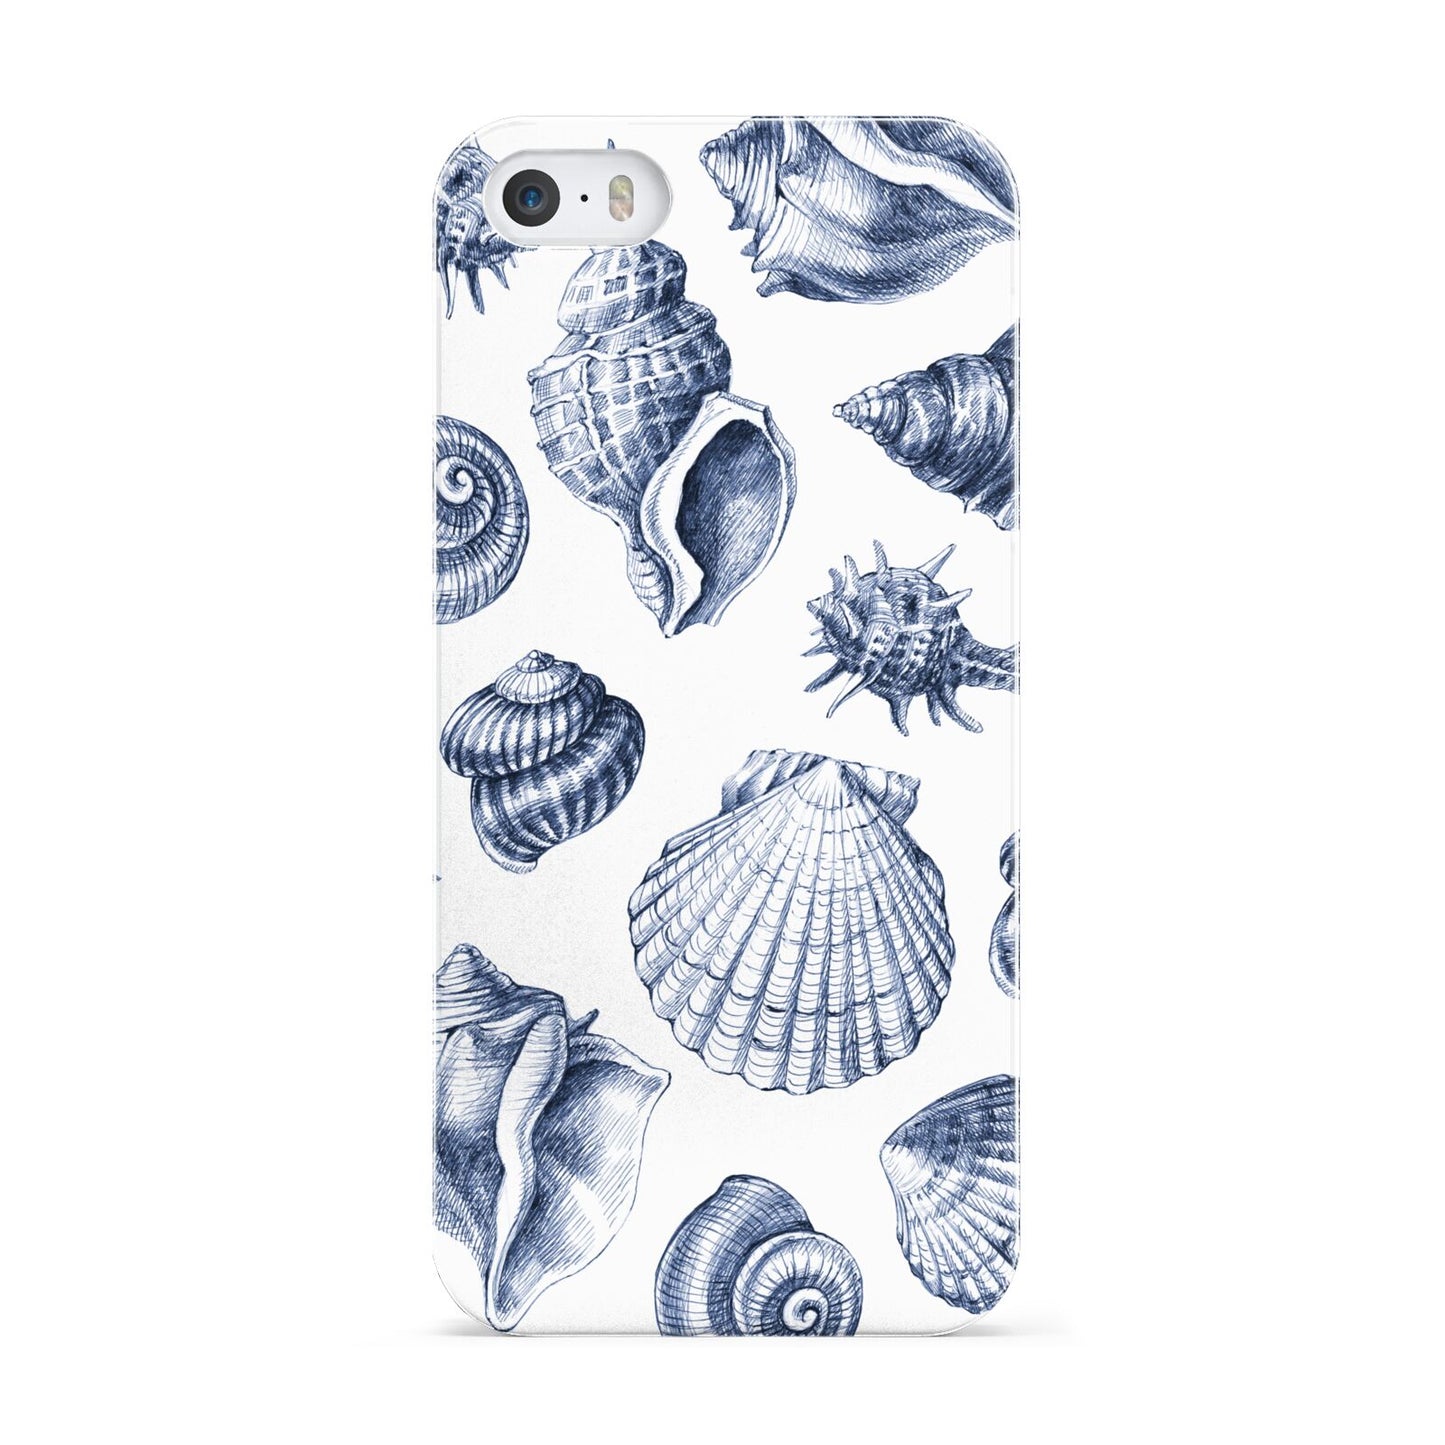 Shell Apple iPhone 5 Case